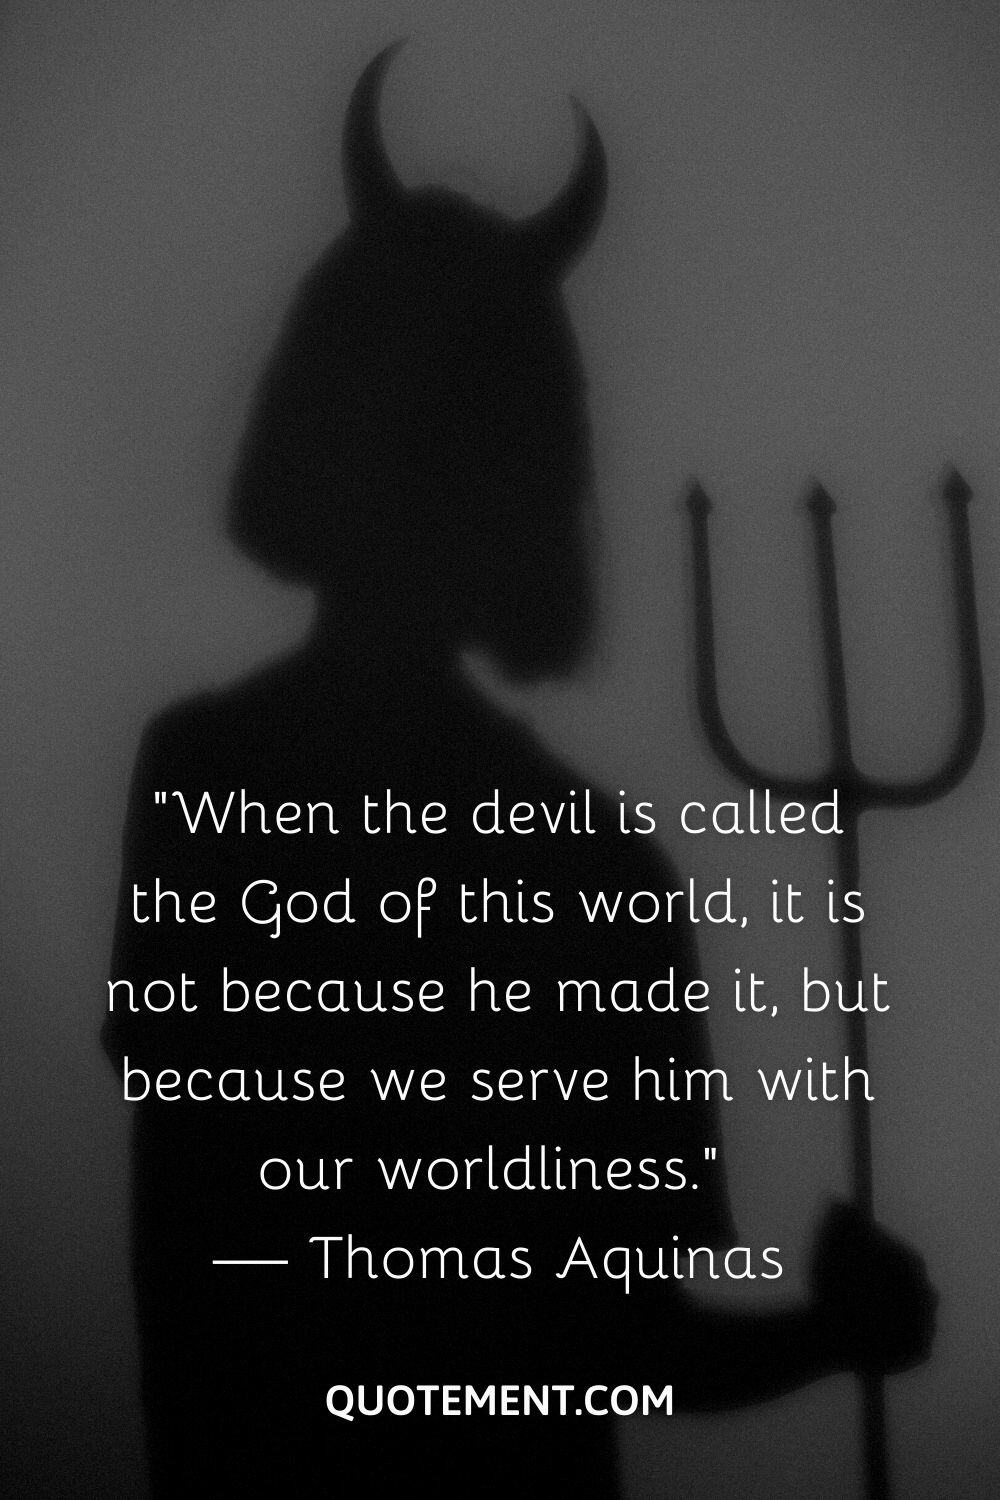 “When the devil is called the God of this world, it is not because he made it, but because we serve him with our worldliness.” — Thomas Aquinas